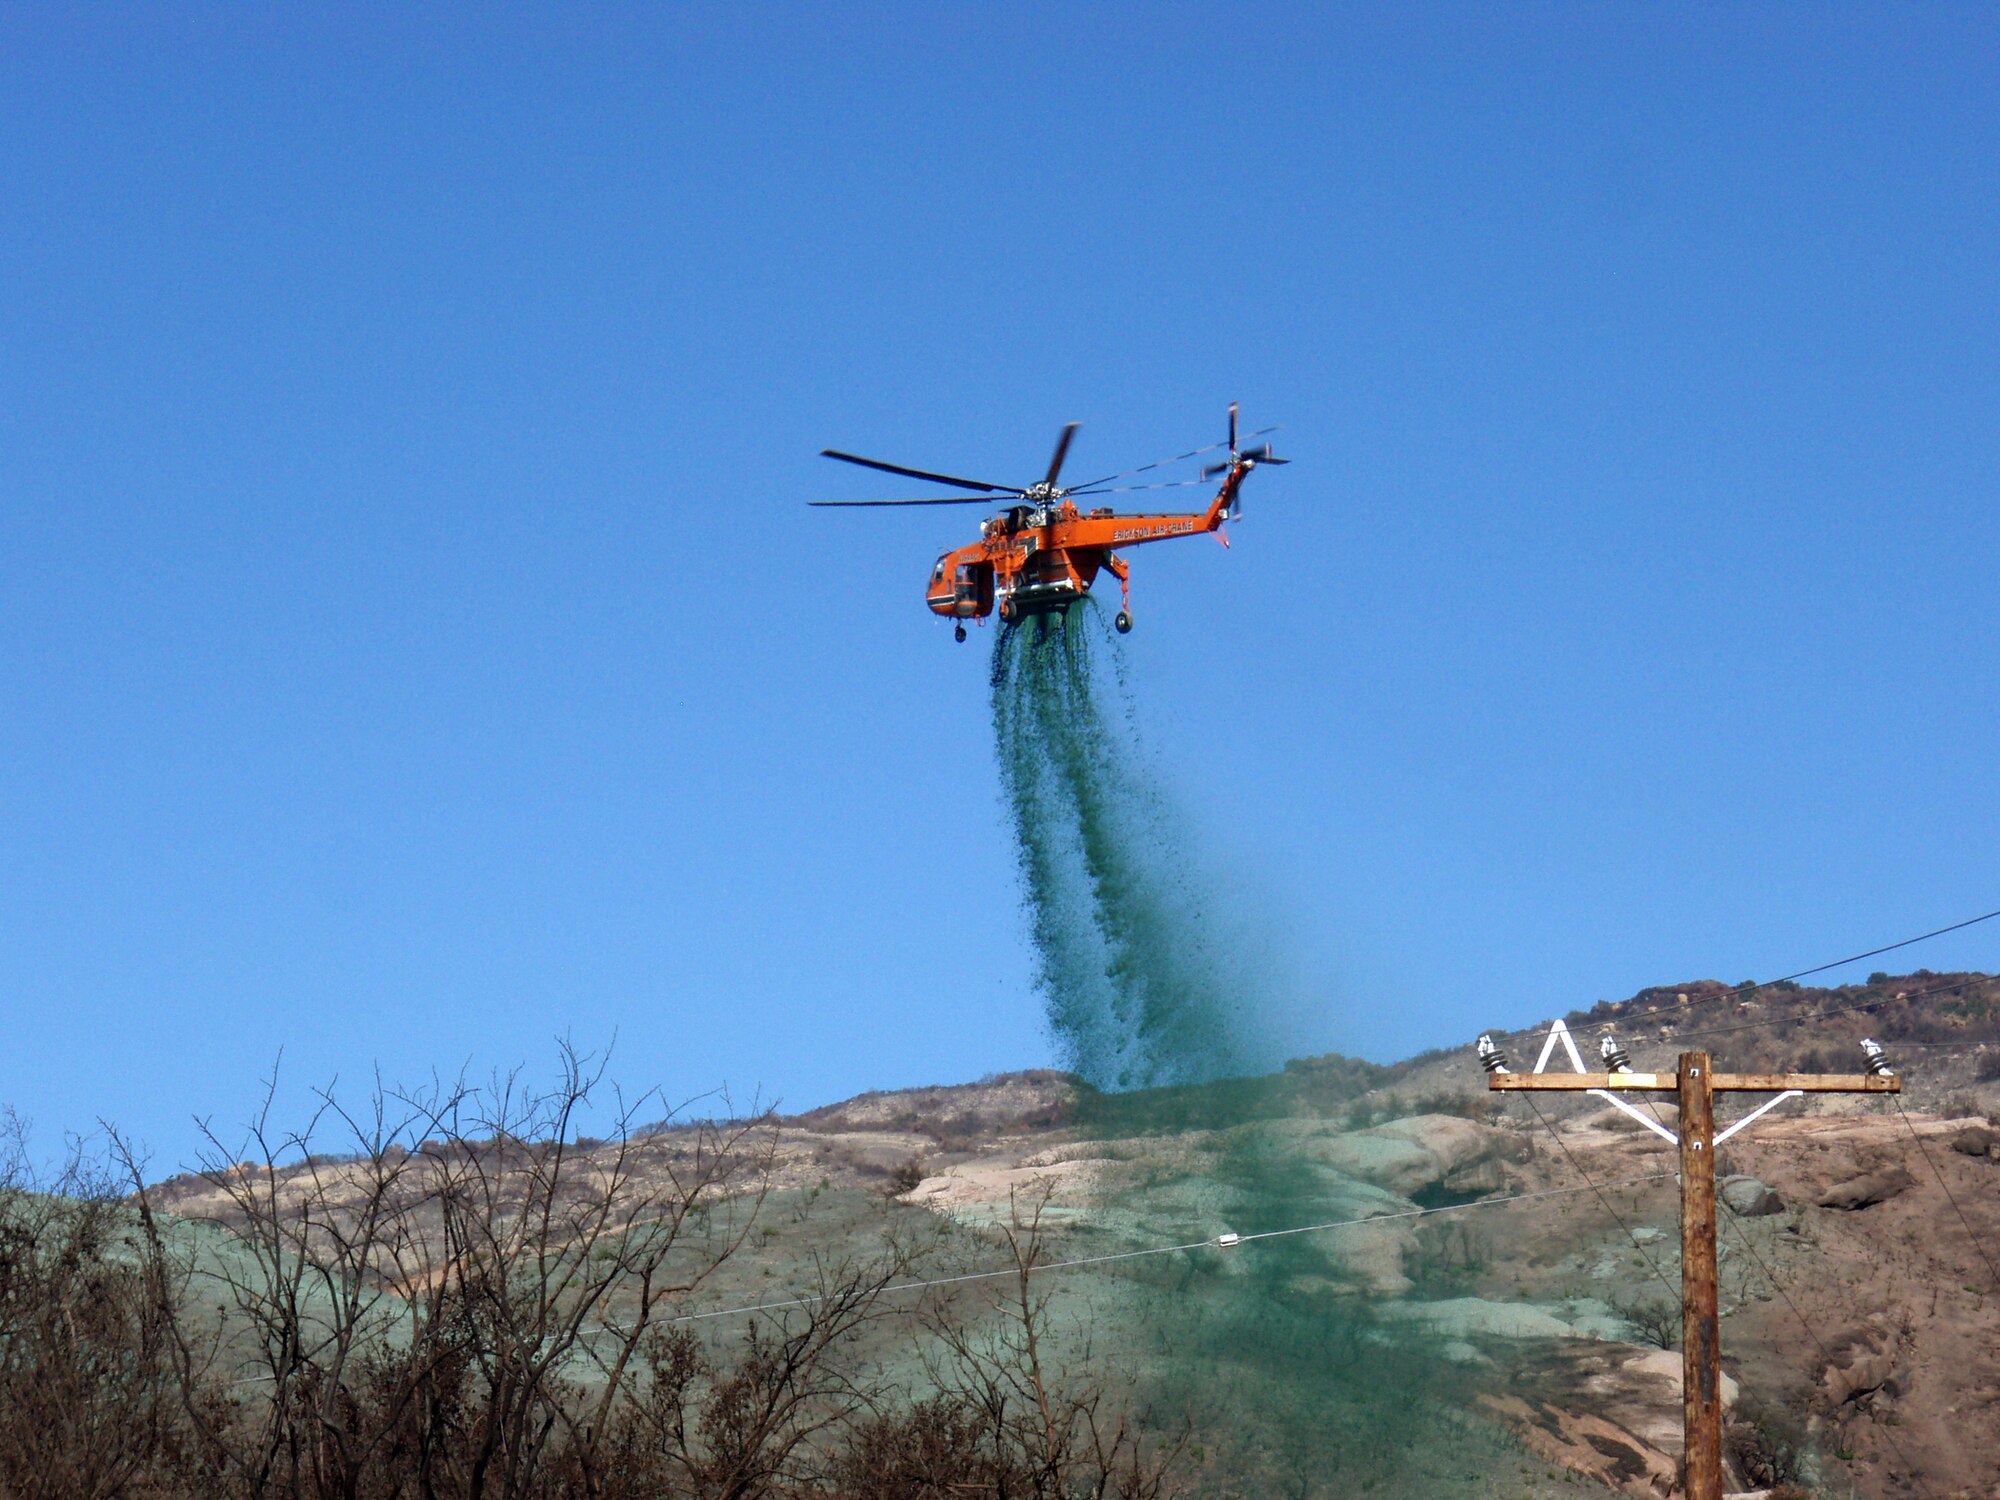 Hydromulch, used for reseeding and erosion control and manufactured by Fiberwood LLC at the former McClellan Air Force Base in Sacramento, Calif., is sprayed after a grass fire near Santa Barbara, Calif.  The mulch, made of recycled newspaper, can be applied as soon as a fire is out. (Courtesy photo)